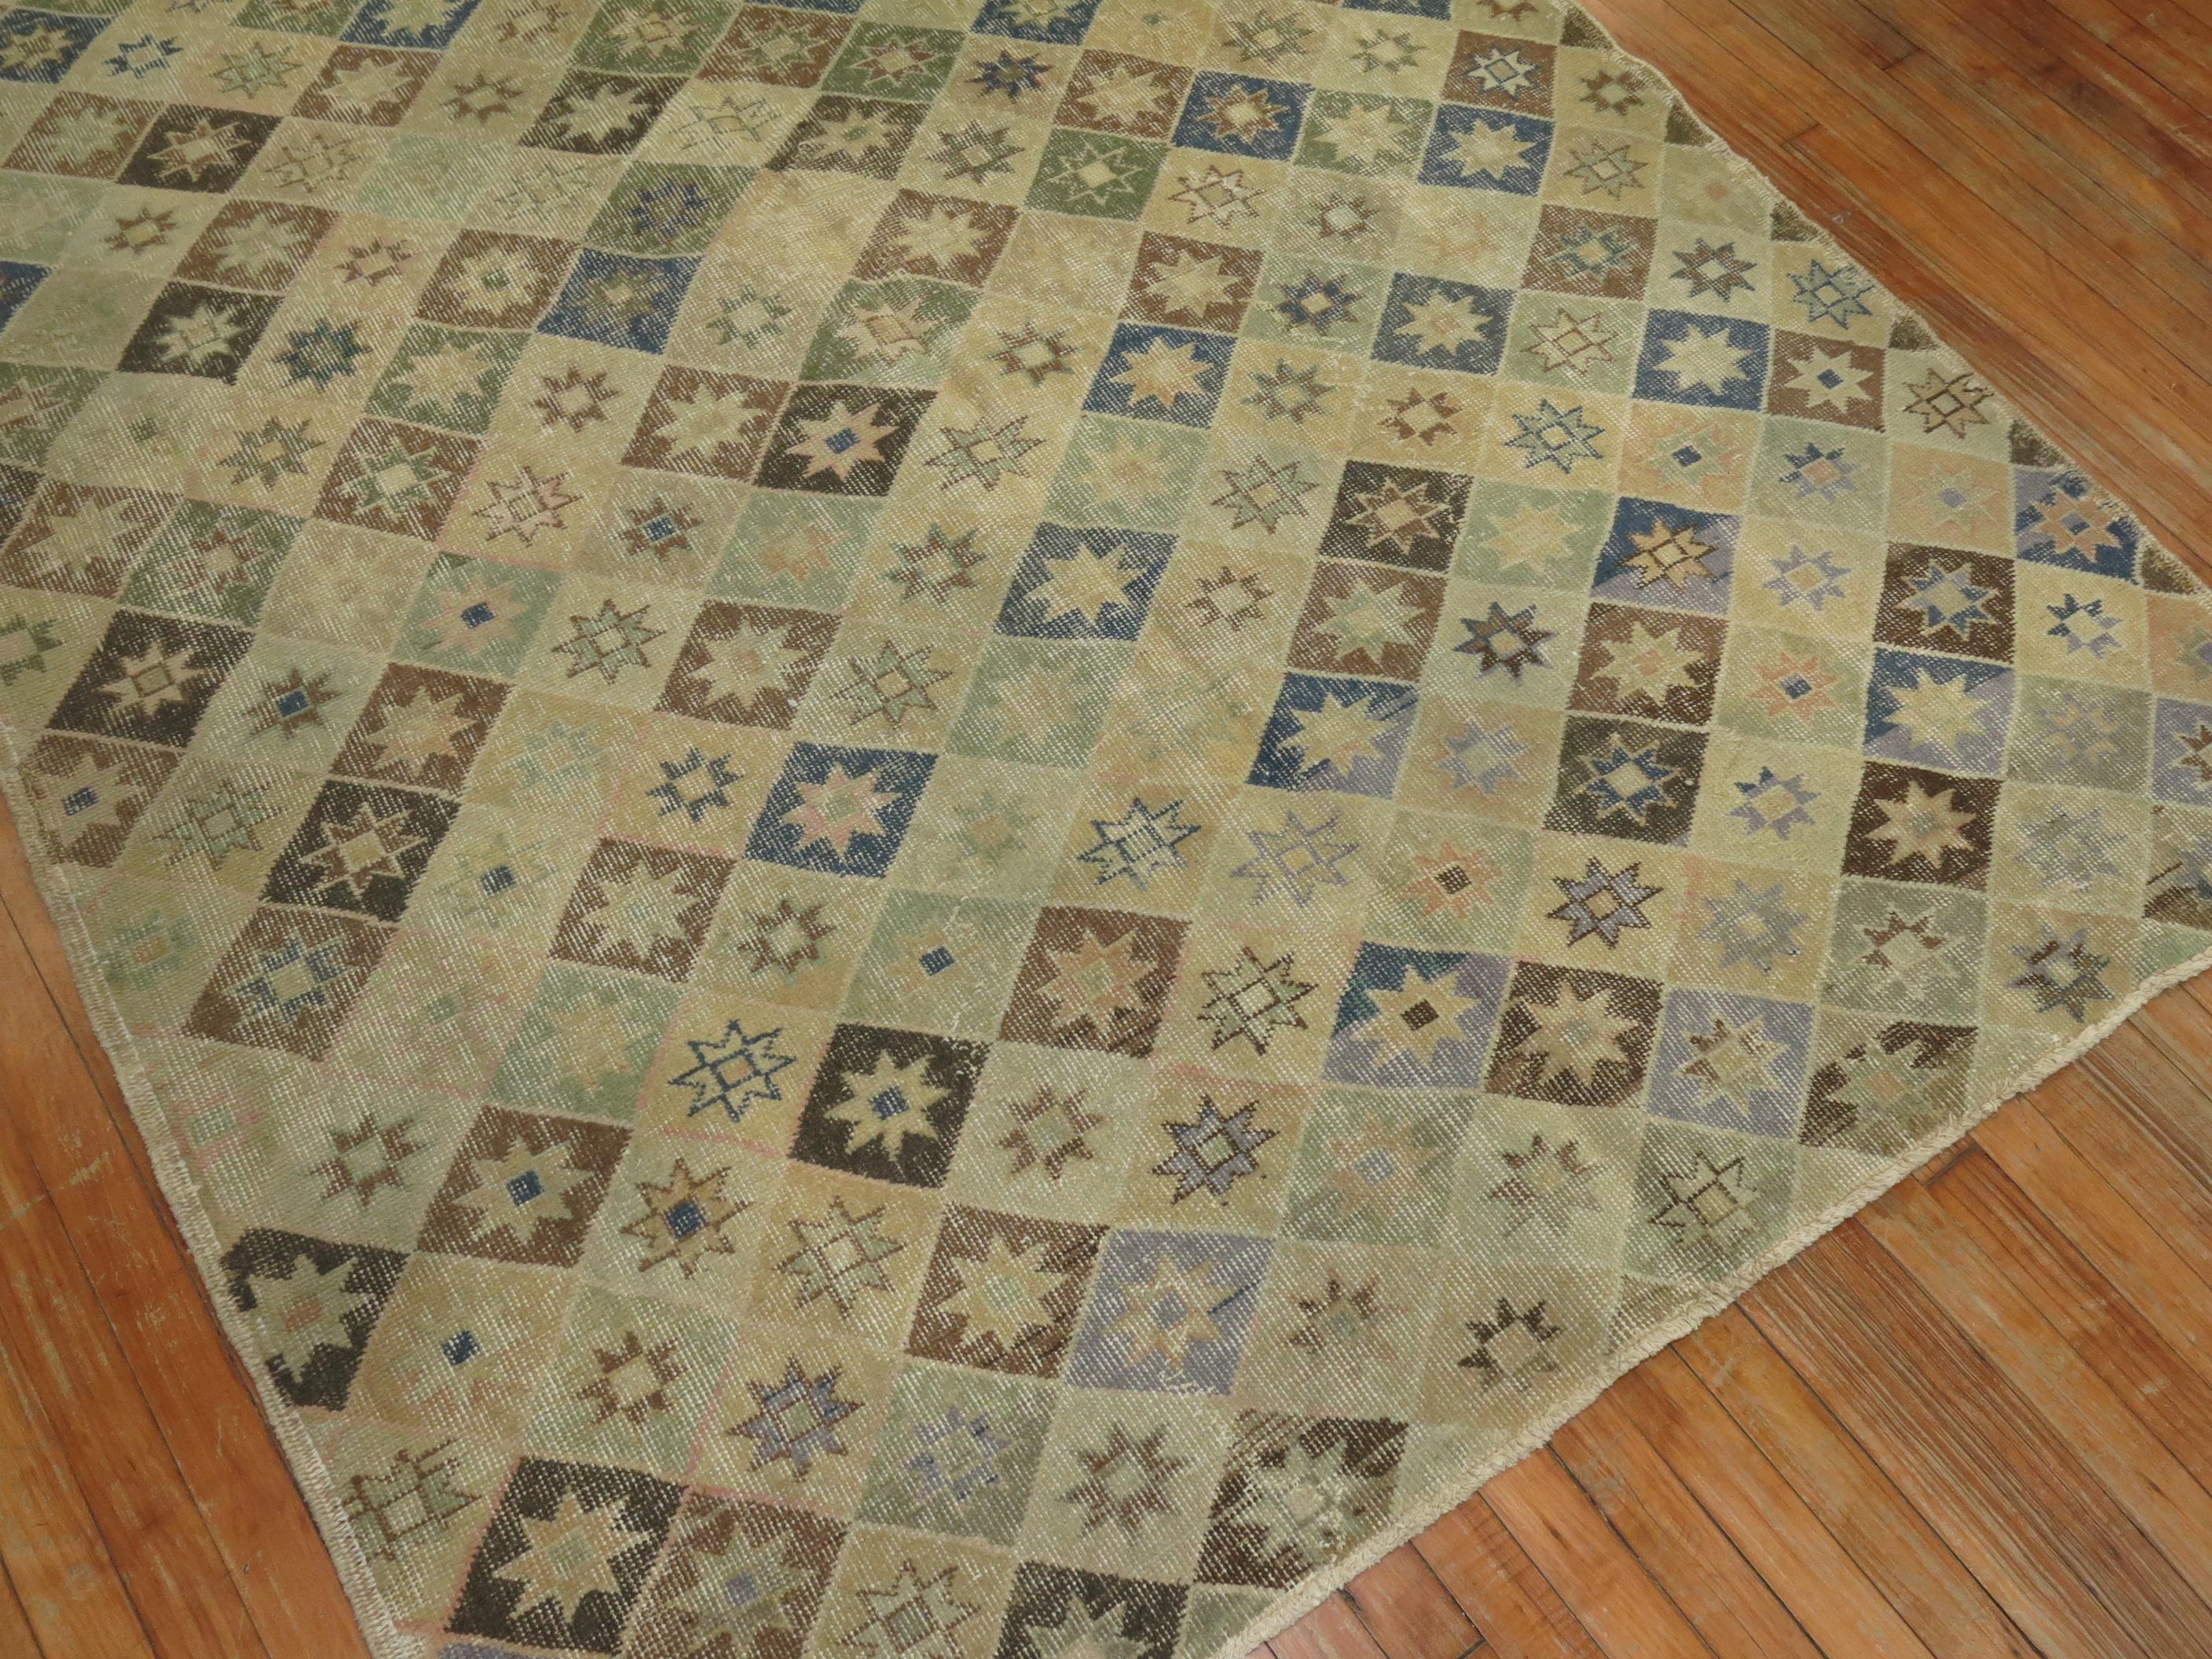 Intermediate size one of a kind midcentury Turkish Deco rug with earth accents in khaki, denim blue, and brown,

circa mid-20th century/ measures: 5'7” x 8'9”.